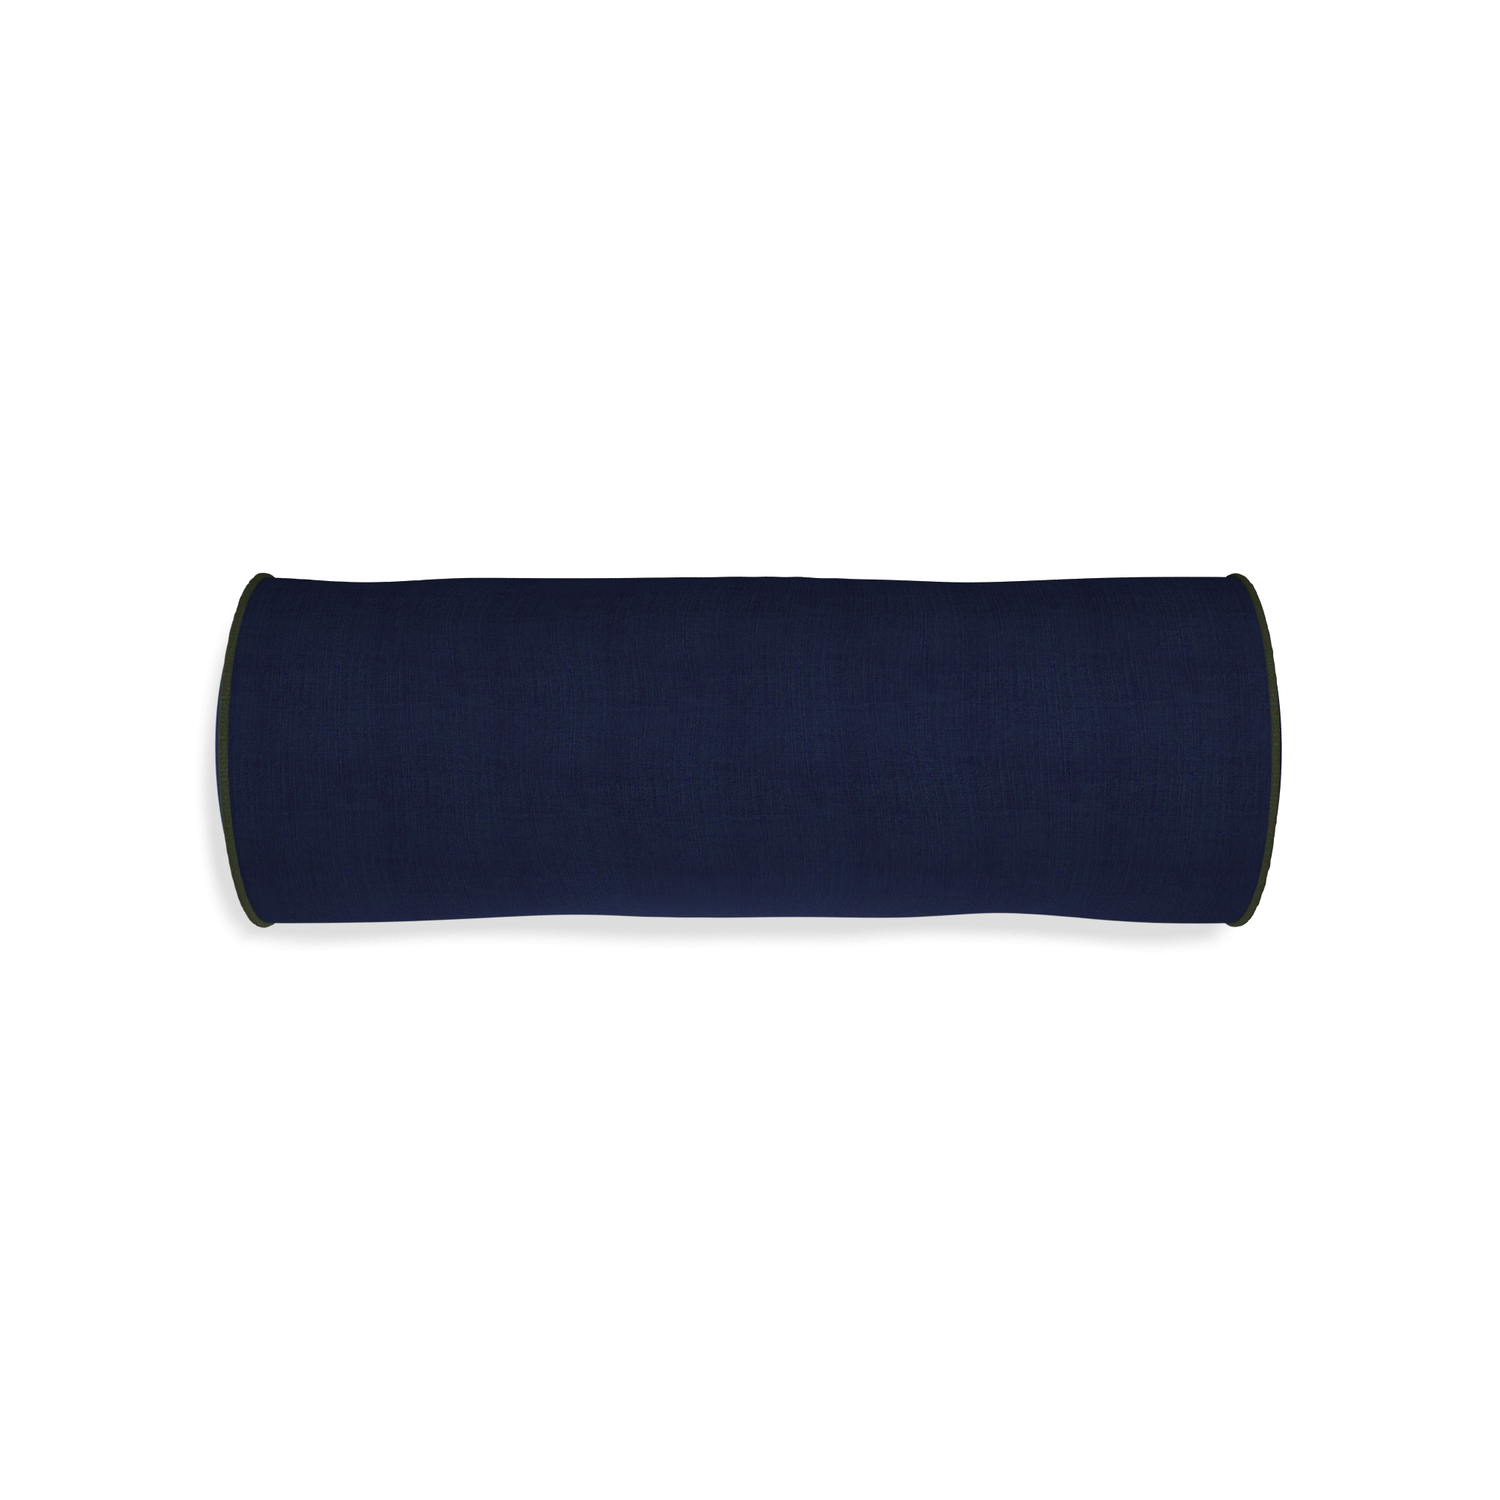 Bolster midnight custom navy bluepillow with f piping on white background